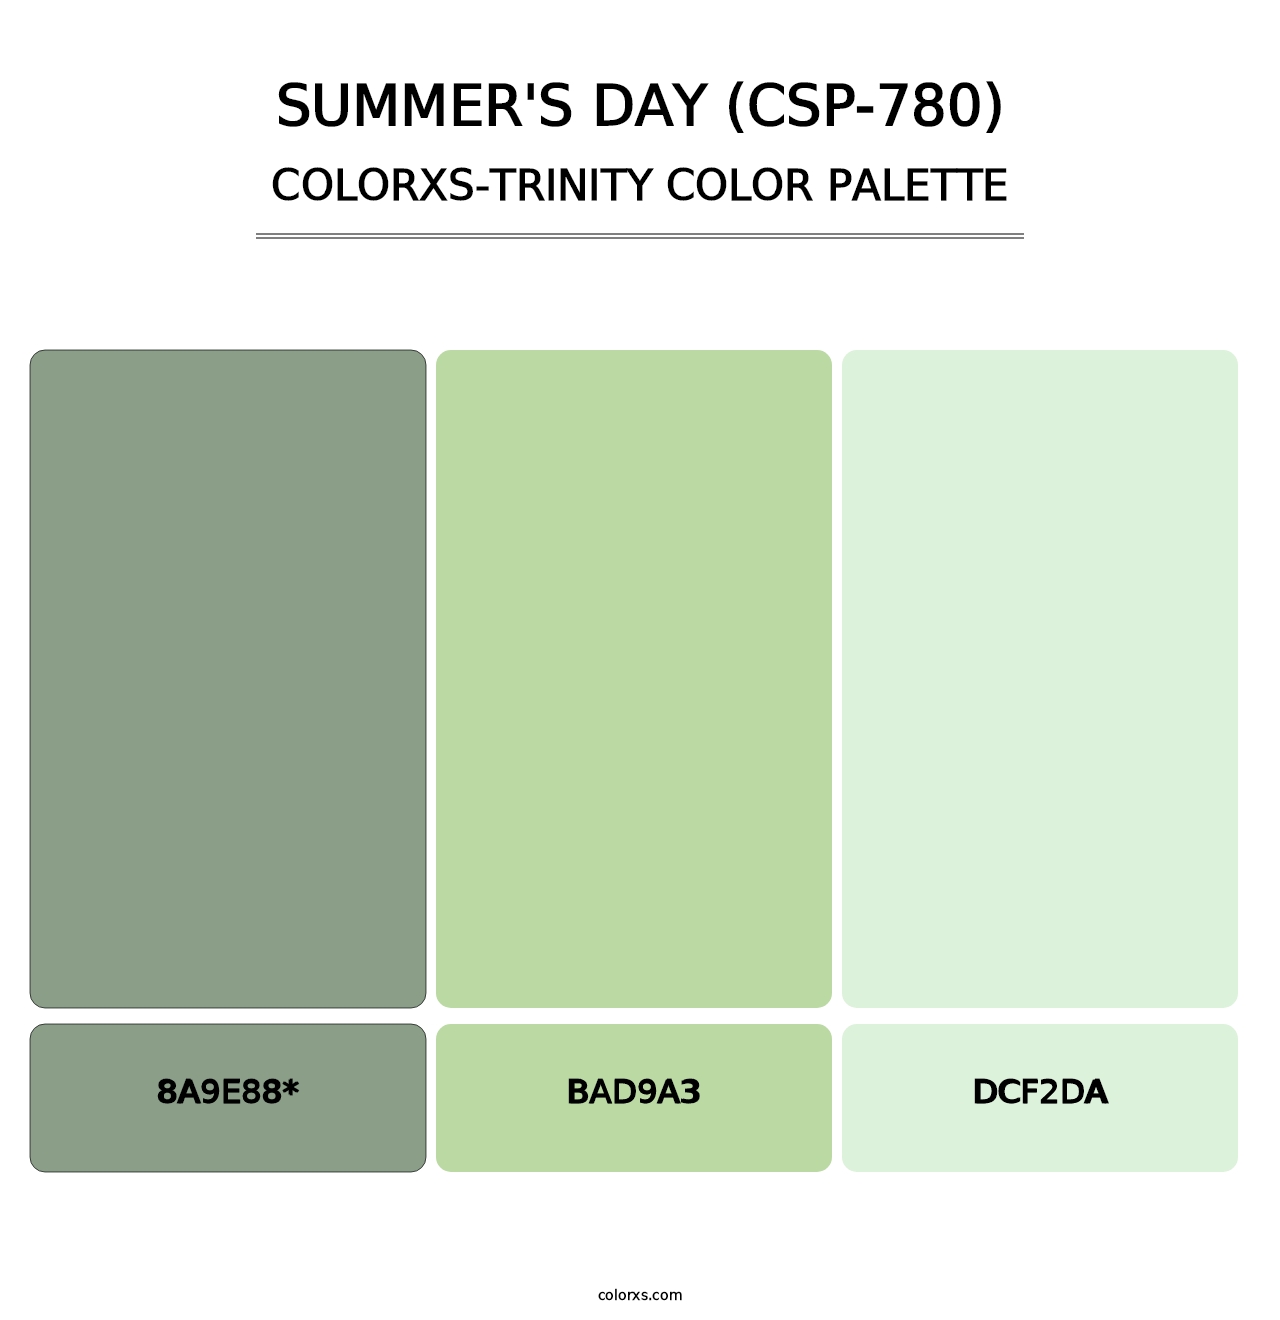 Summer's Day (CSP-780) - Colorxs Trinity Palette